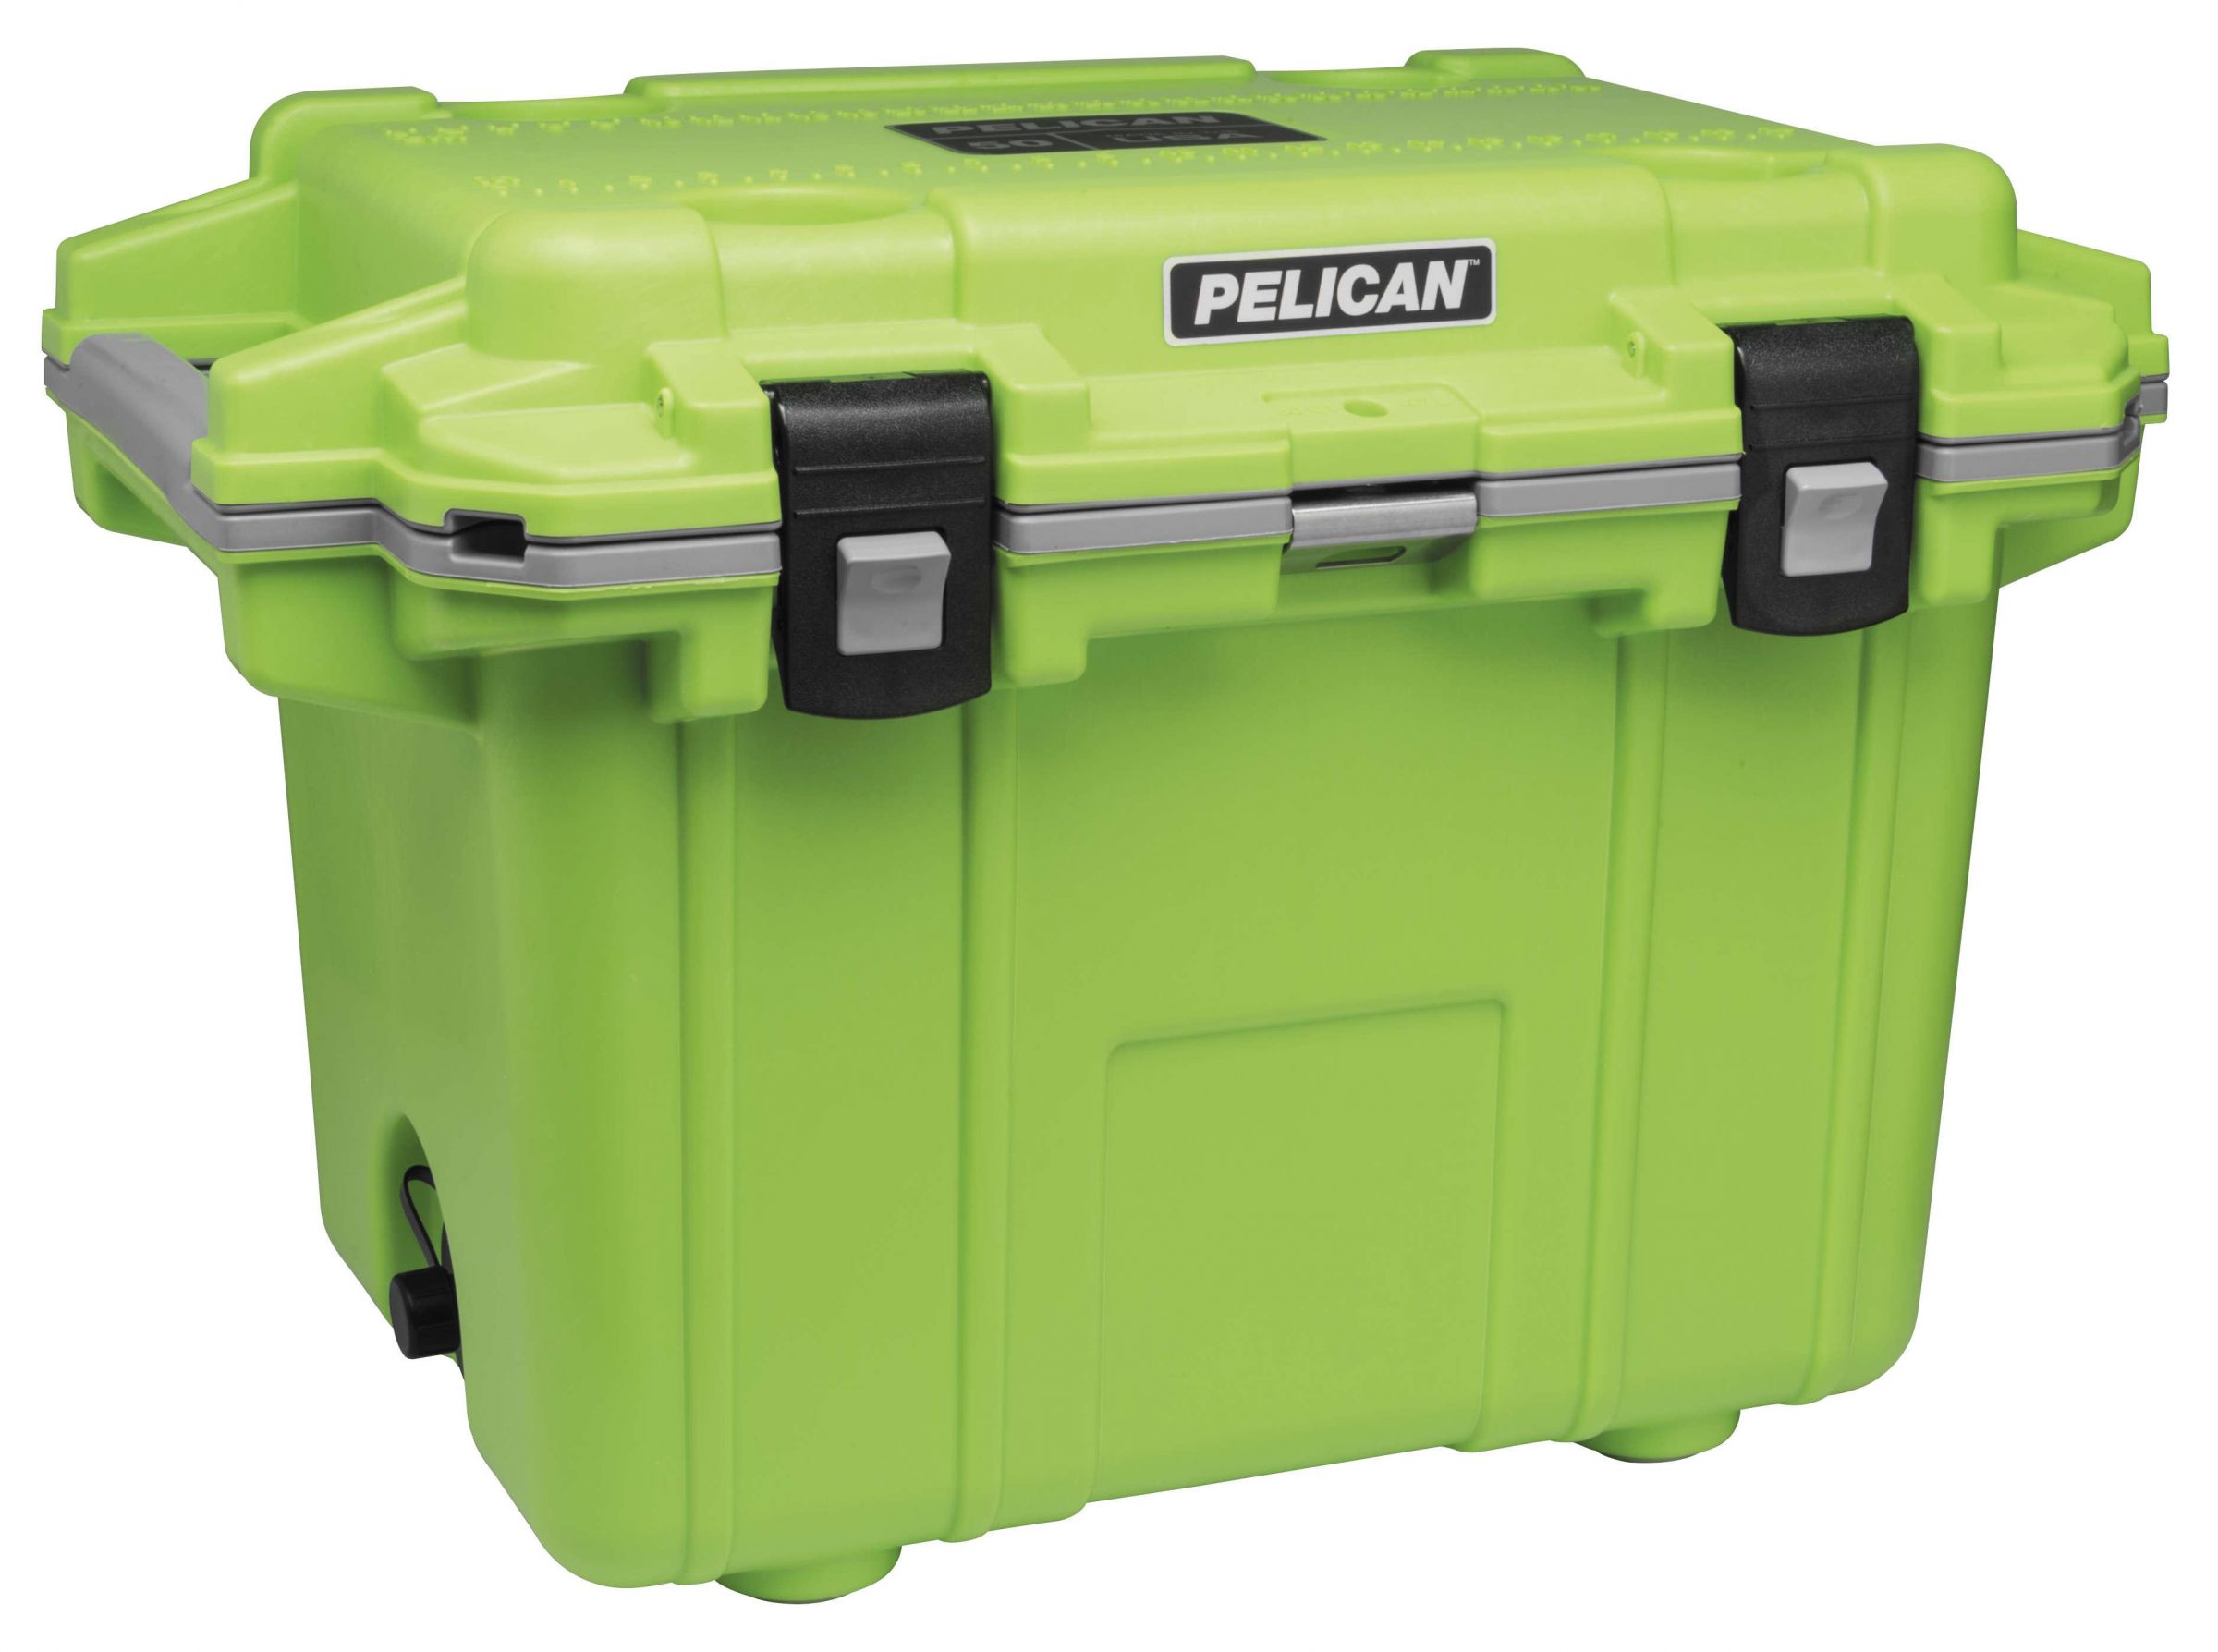 4PUR-PELICAN-P-50Q-1-GRBGRY 50 qt. Injection-Molded Cooler - Lime Green/Gray